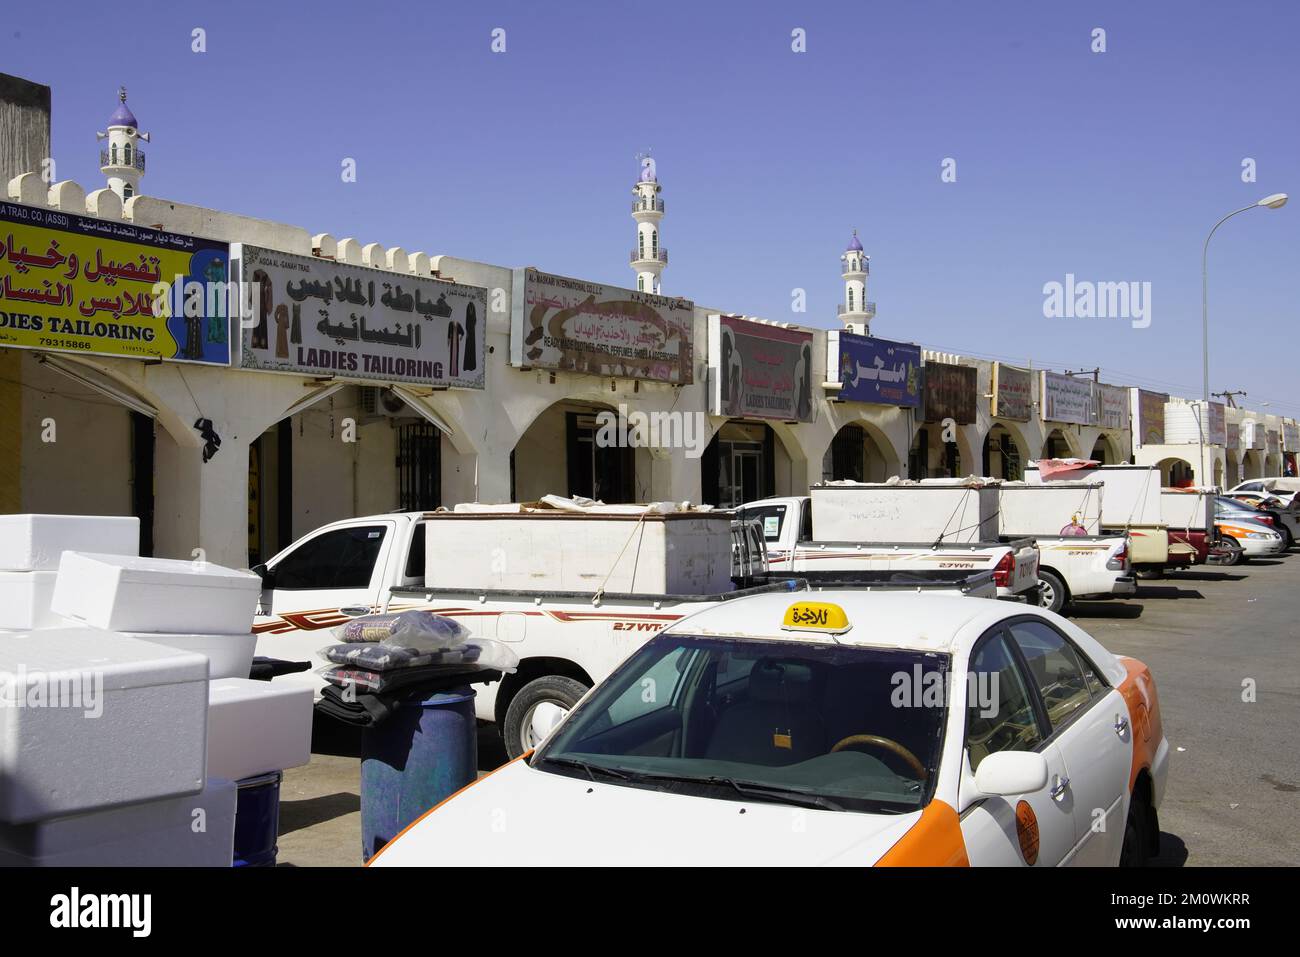 Tailor shops by market square in small town in Hajar region, Sultanate of Oman. Stock Photo